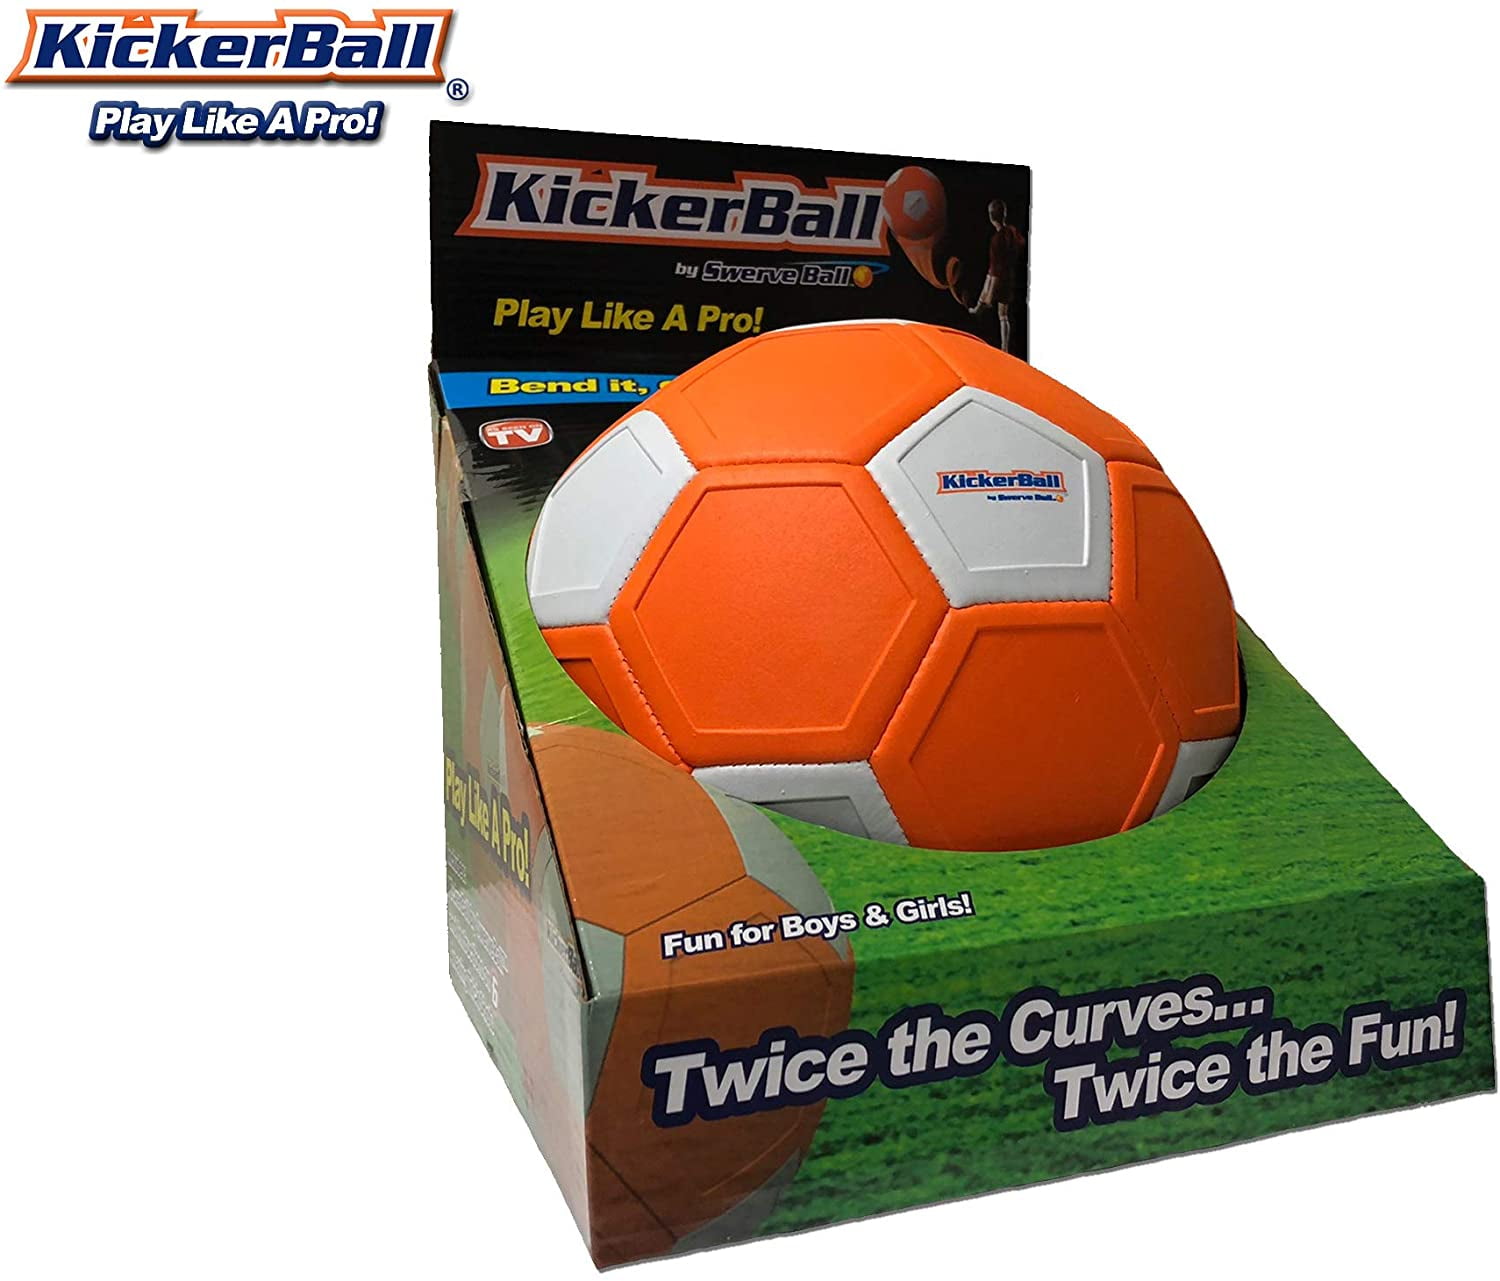 Kickerball By Swerve Ball BEST SELLING TOY 2018 Brand New Football Soccerball 